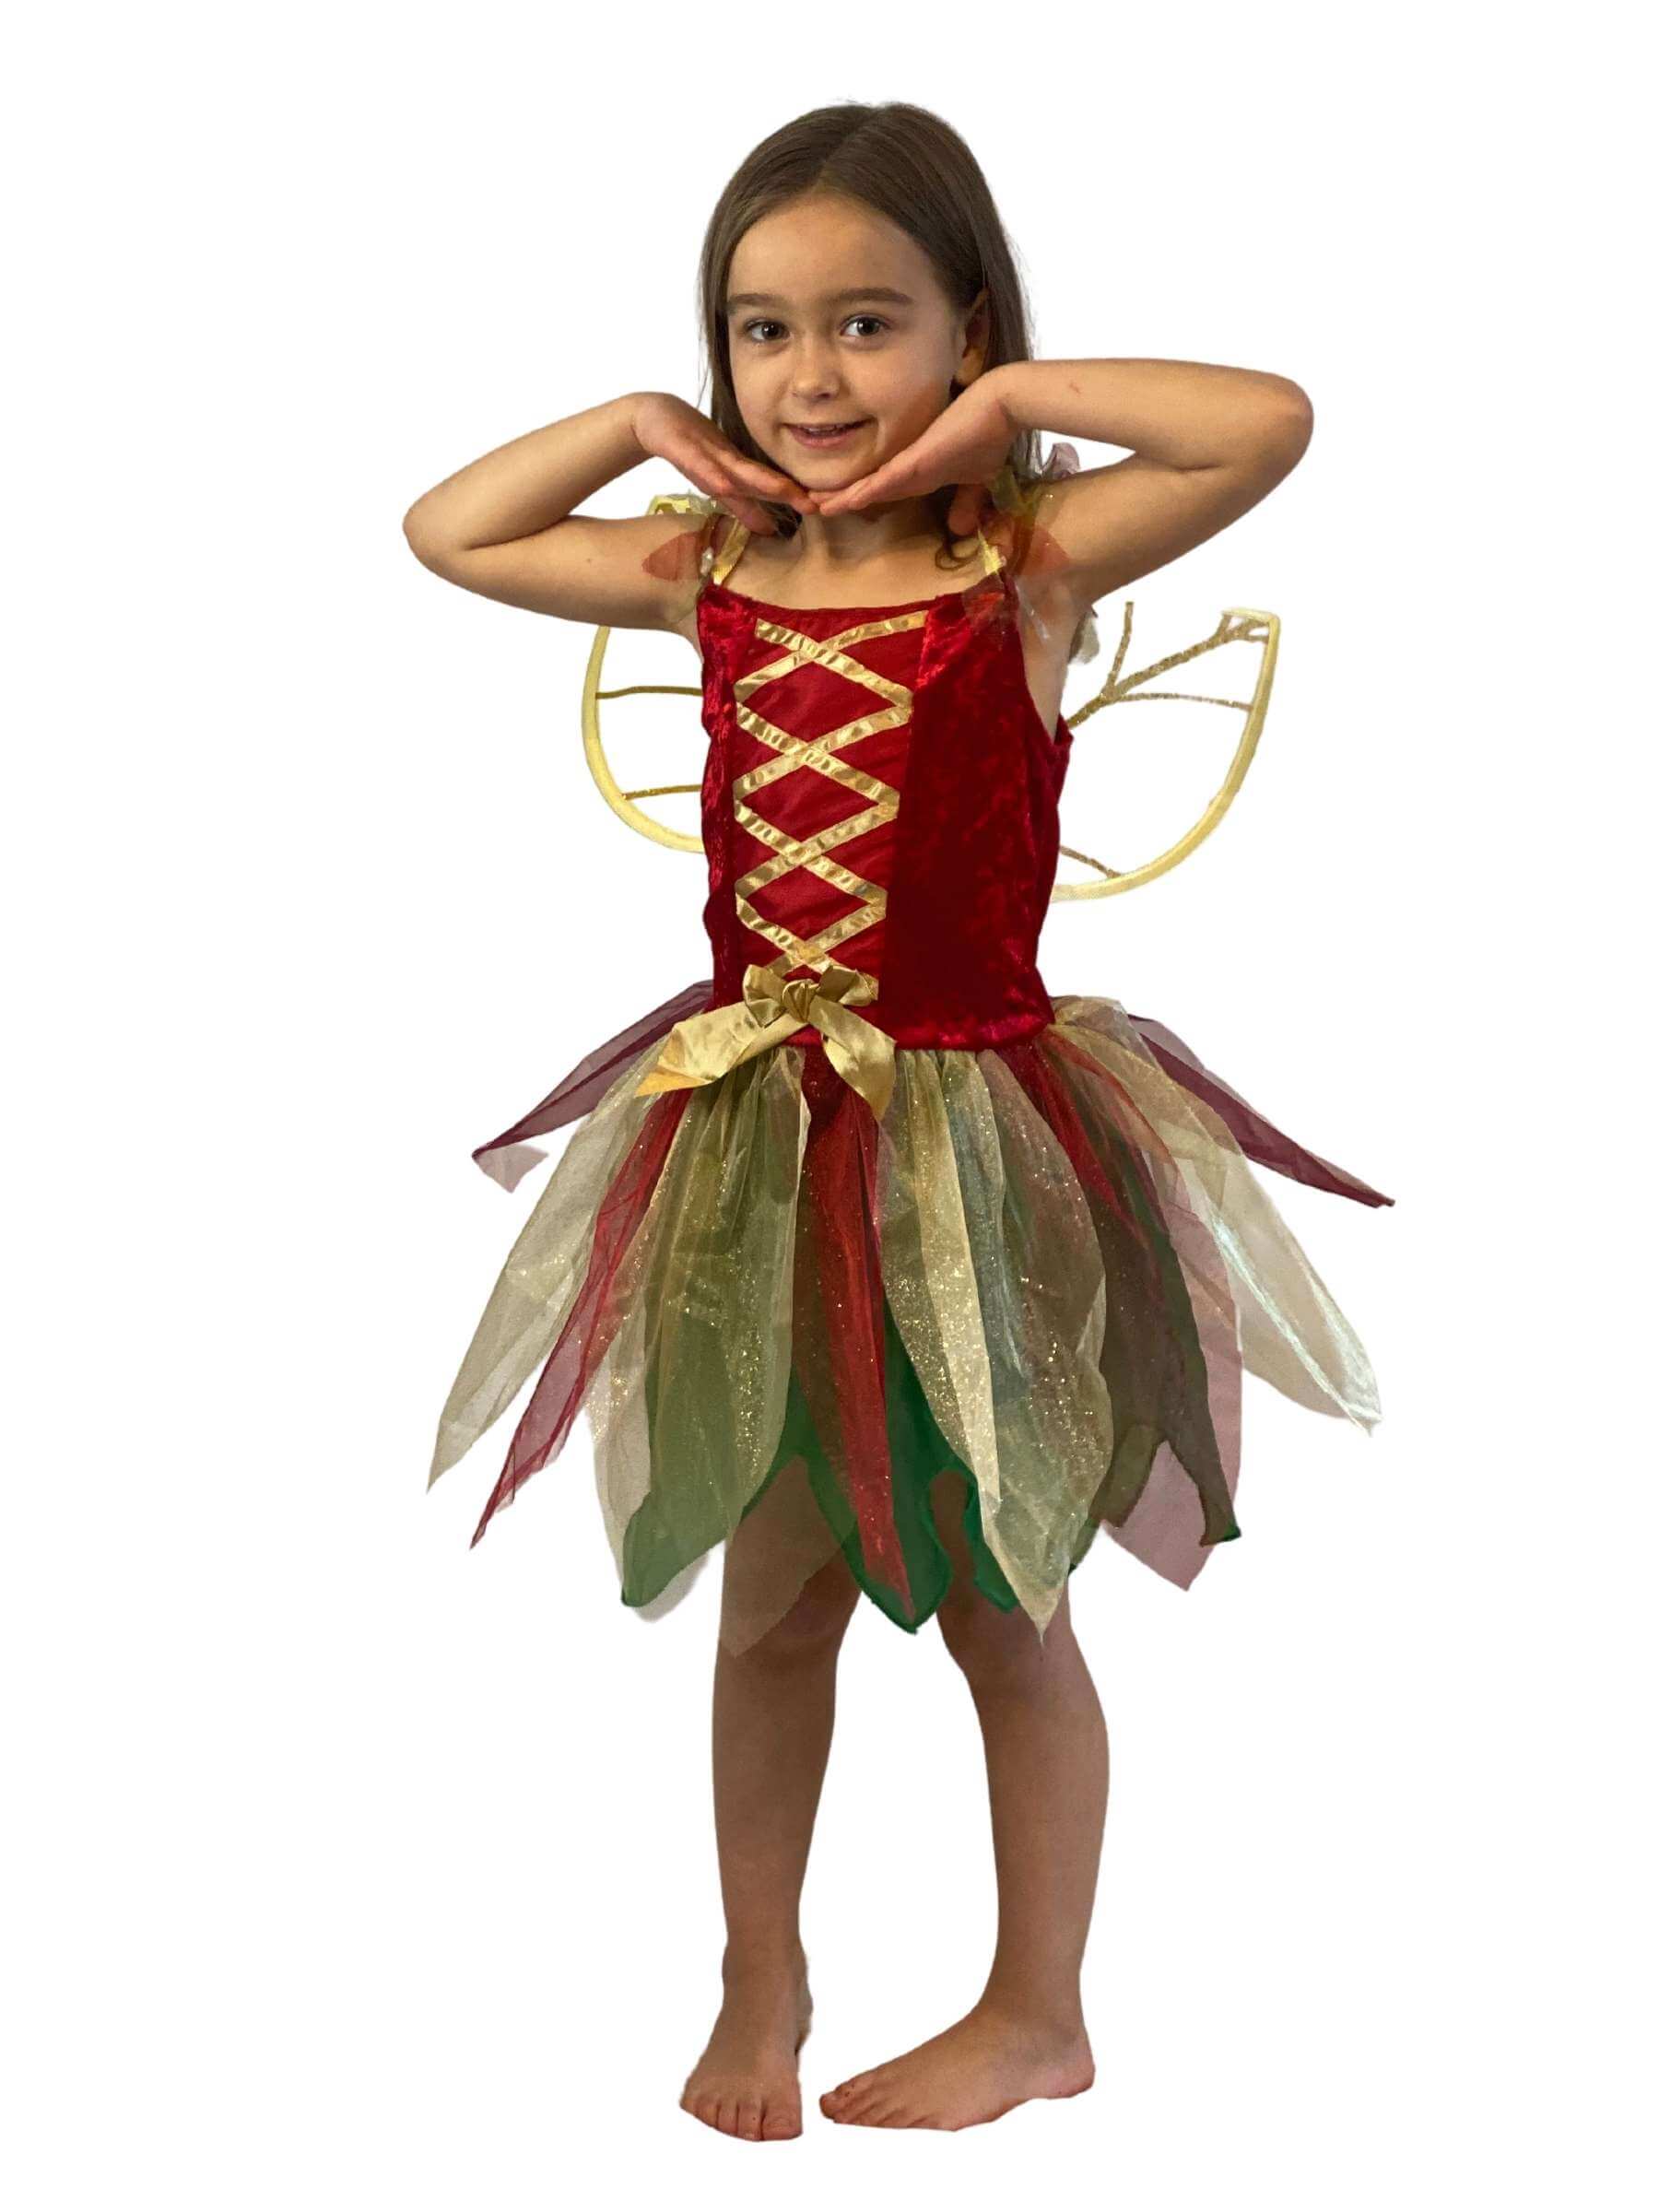 Girl wearing fairy dress costume with red corset pattern body and gold and green skirt.